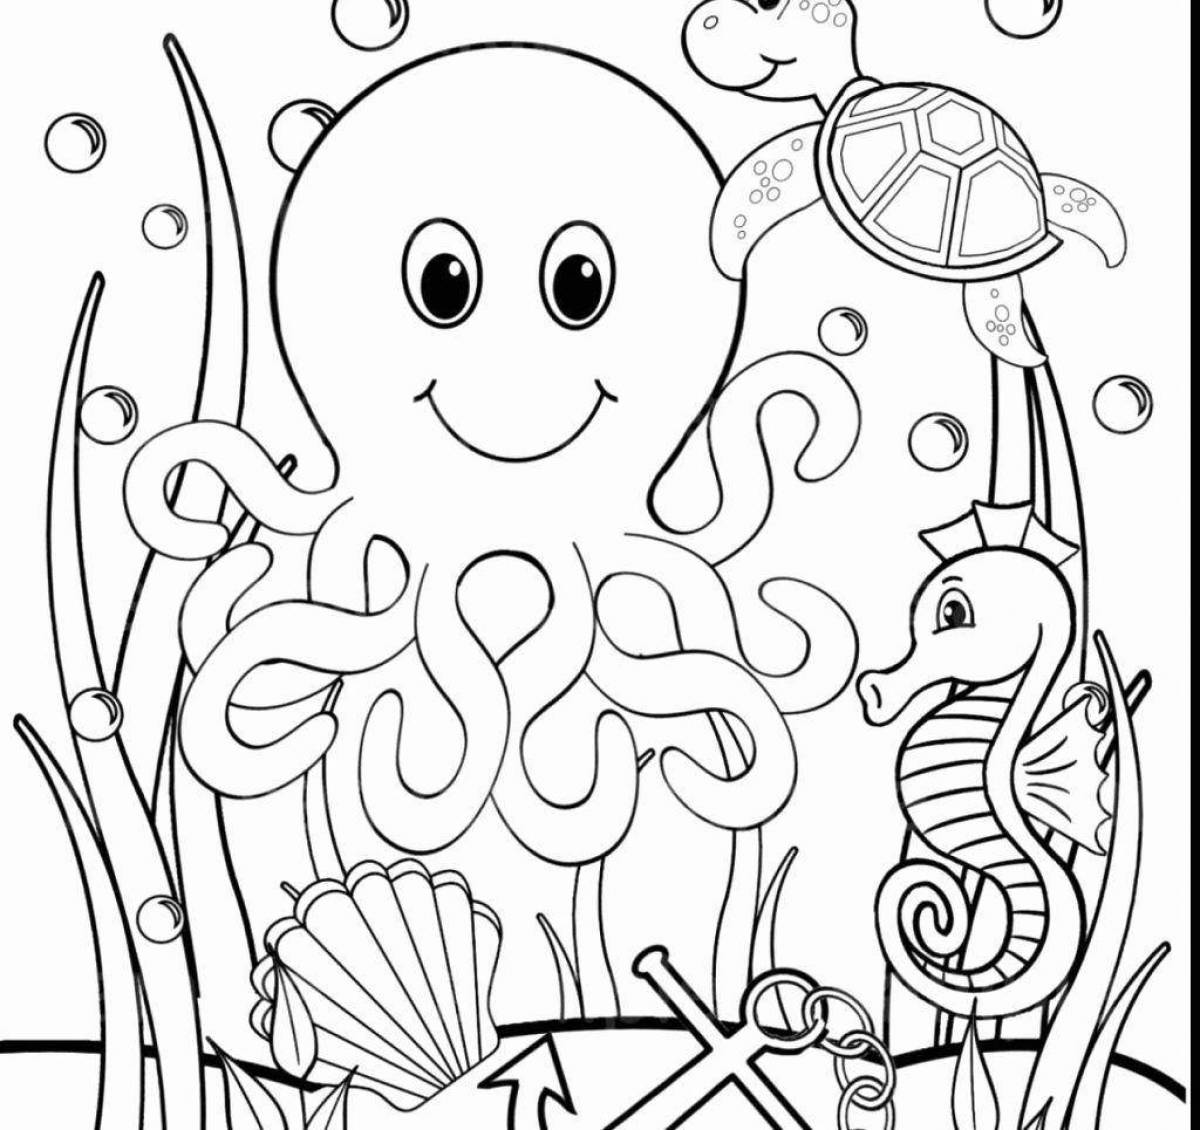 Magic ocean coloring pages for kids